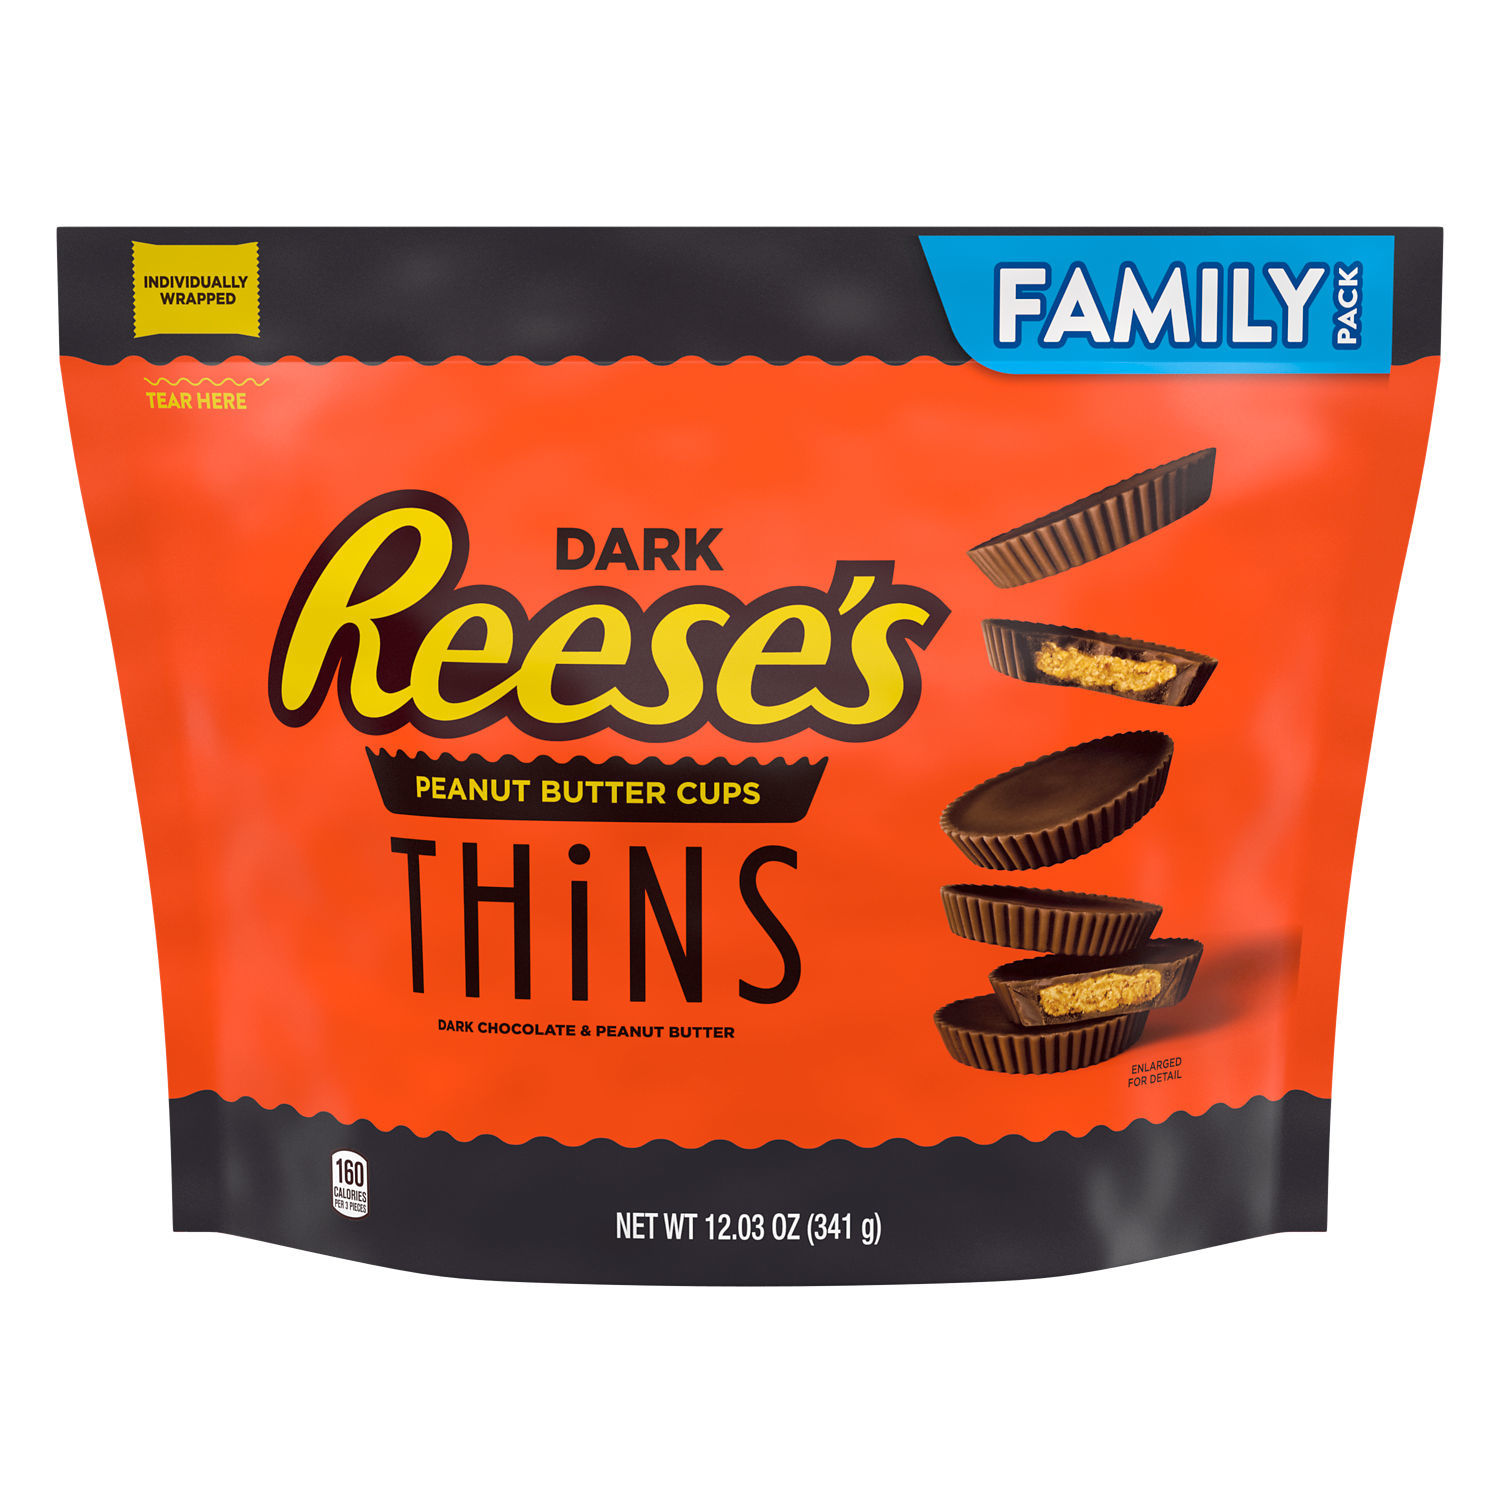 Reese's Thins Dark Chocolate Peanut Butter Cups Candy, Family Pack 12.03 oz - image 1 of 8